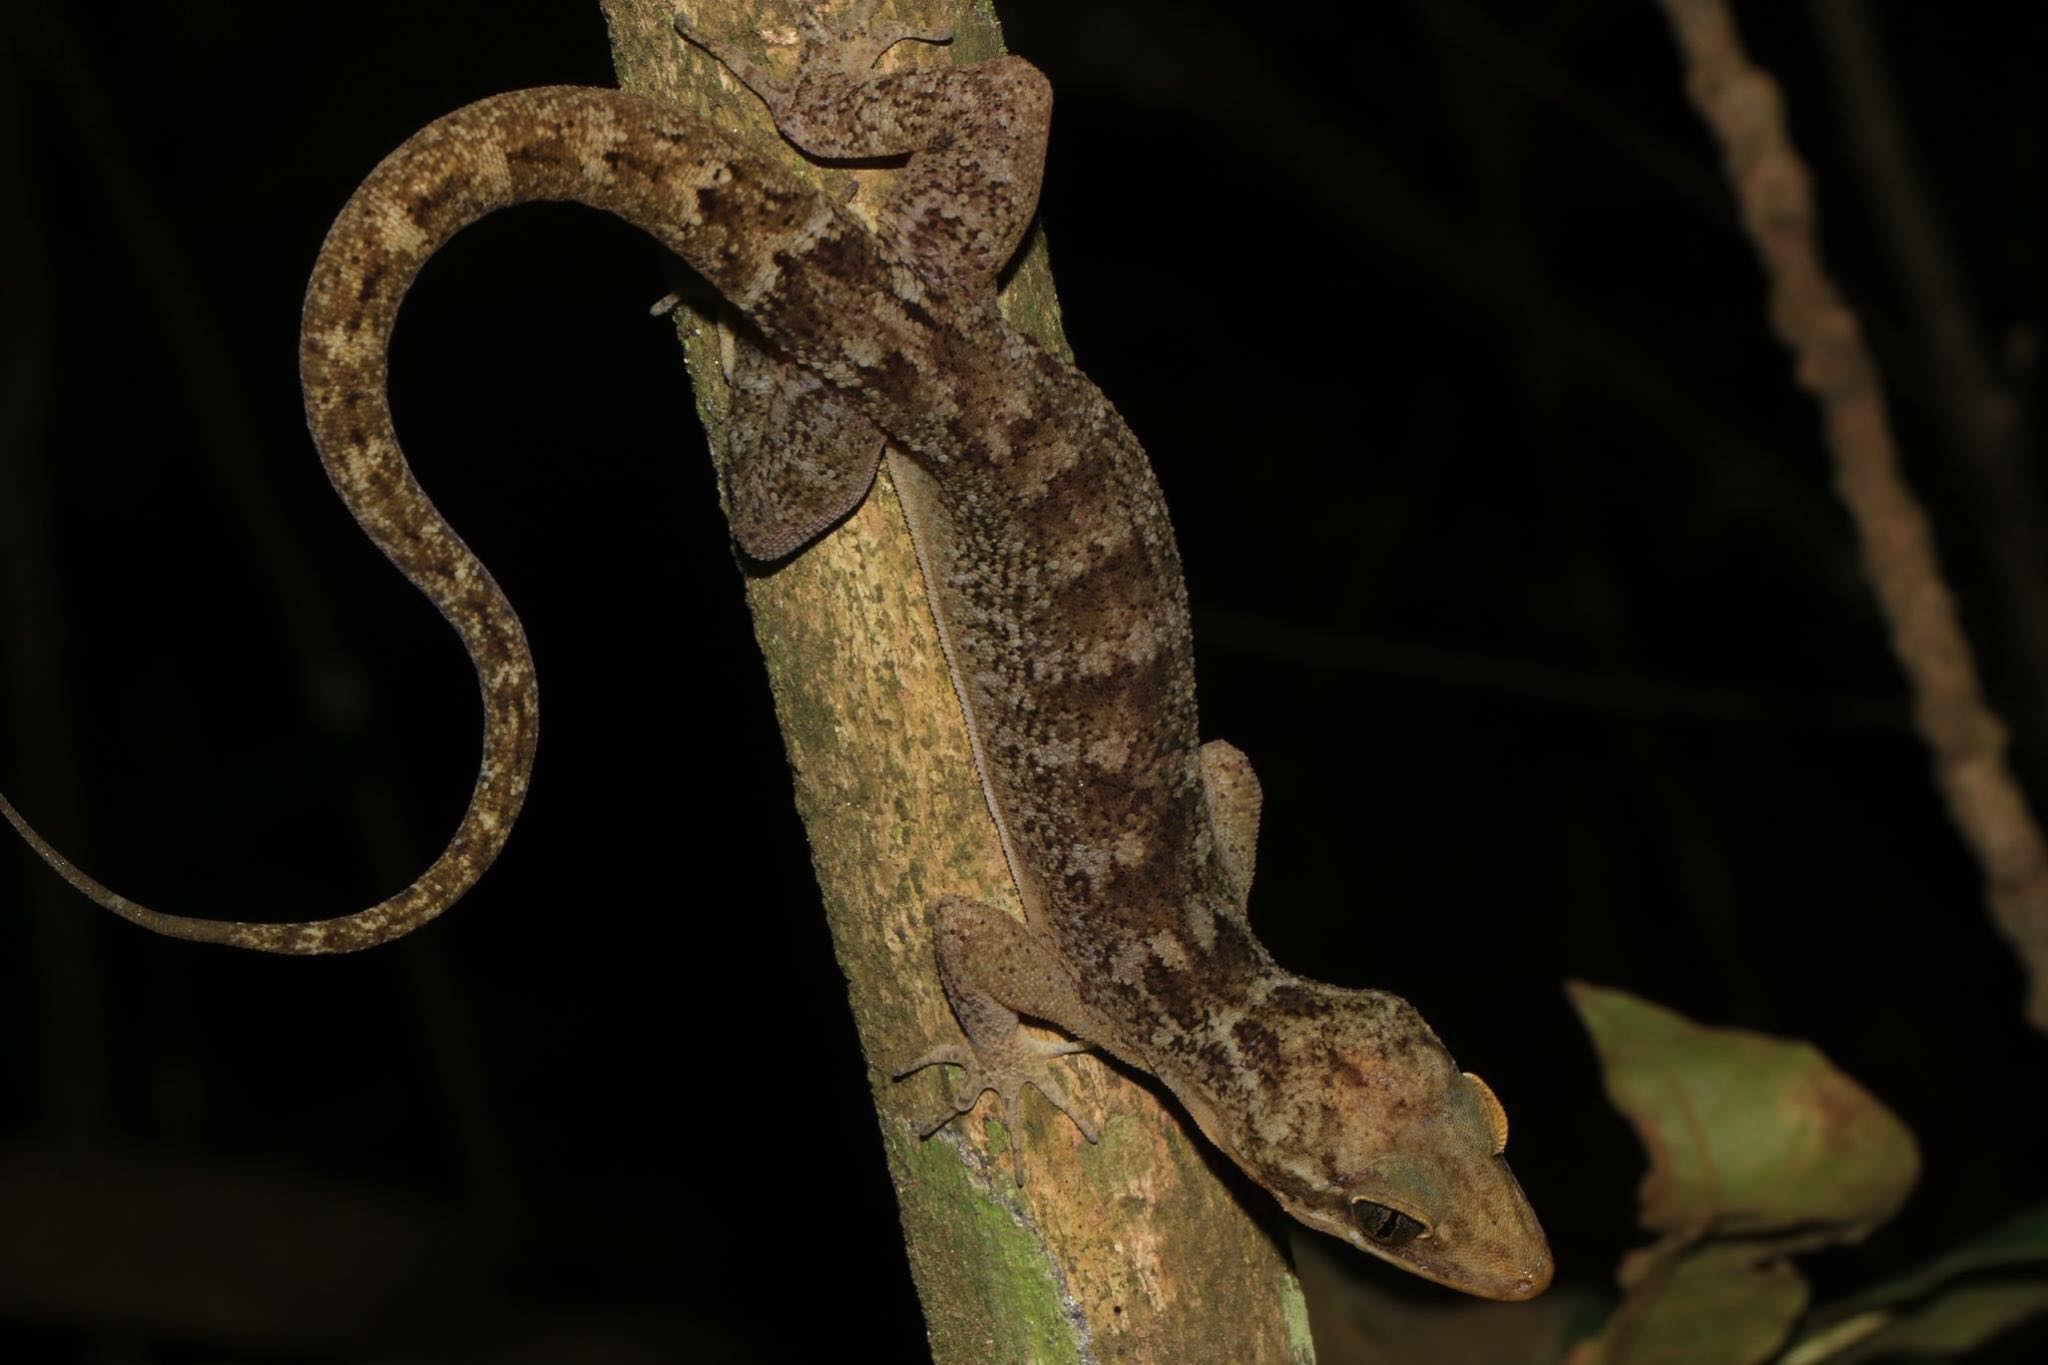 Christmas Island Giant Gecko with its head downward on an upright branch with its tail curling into the air.